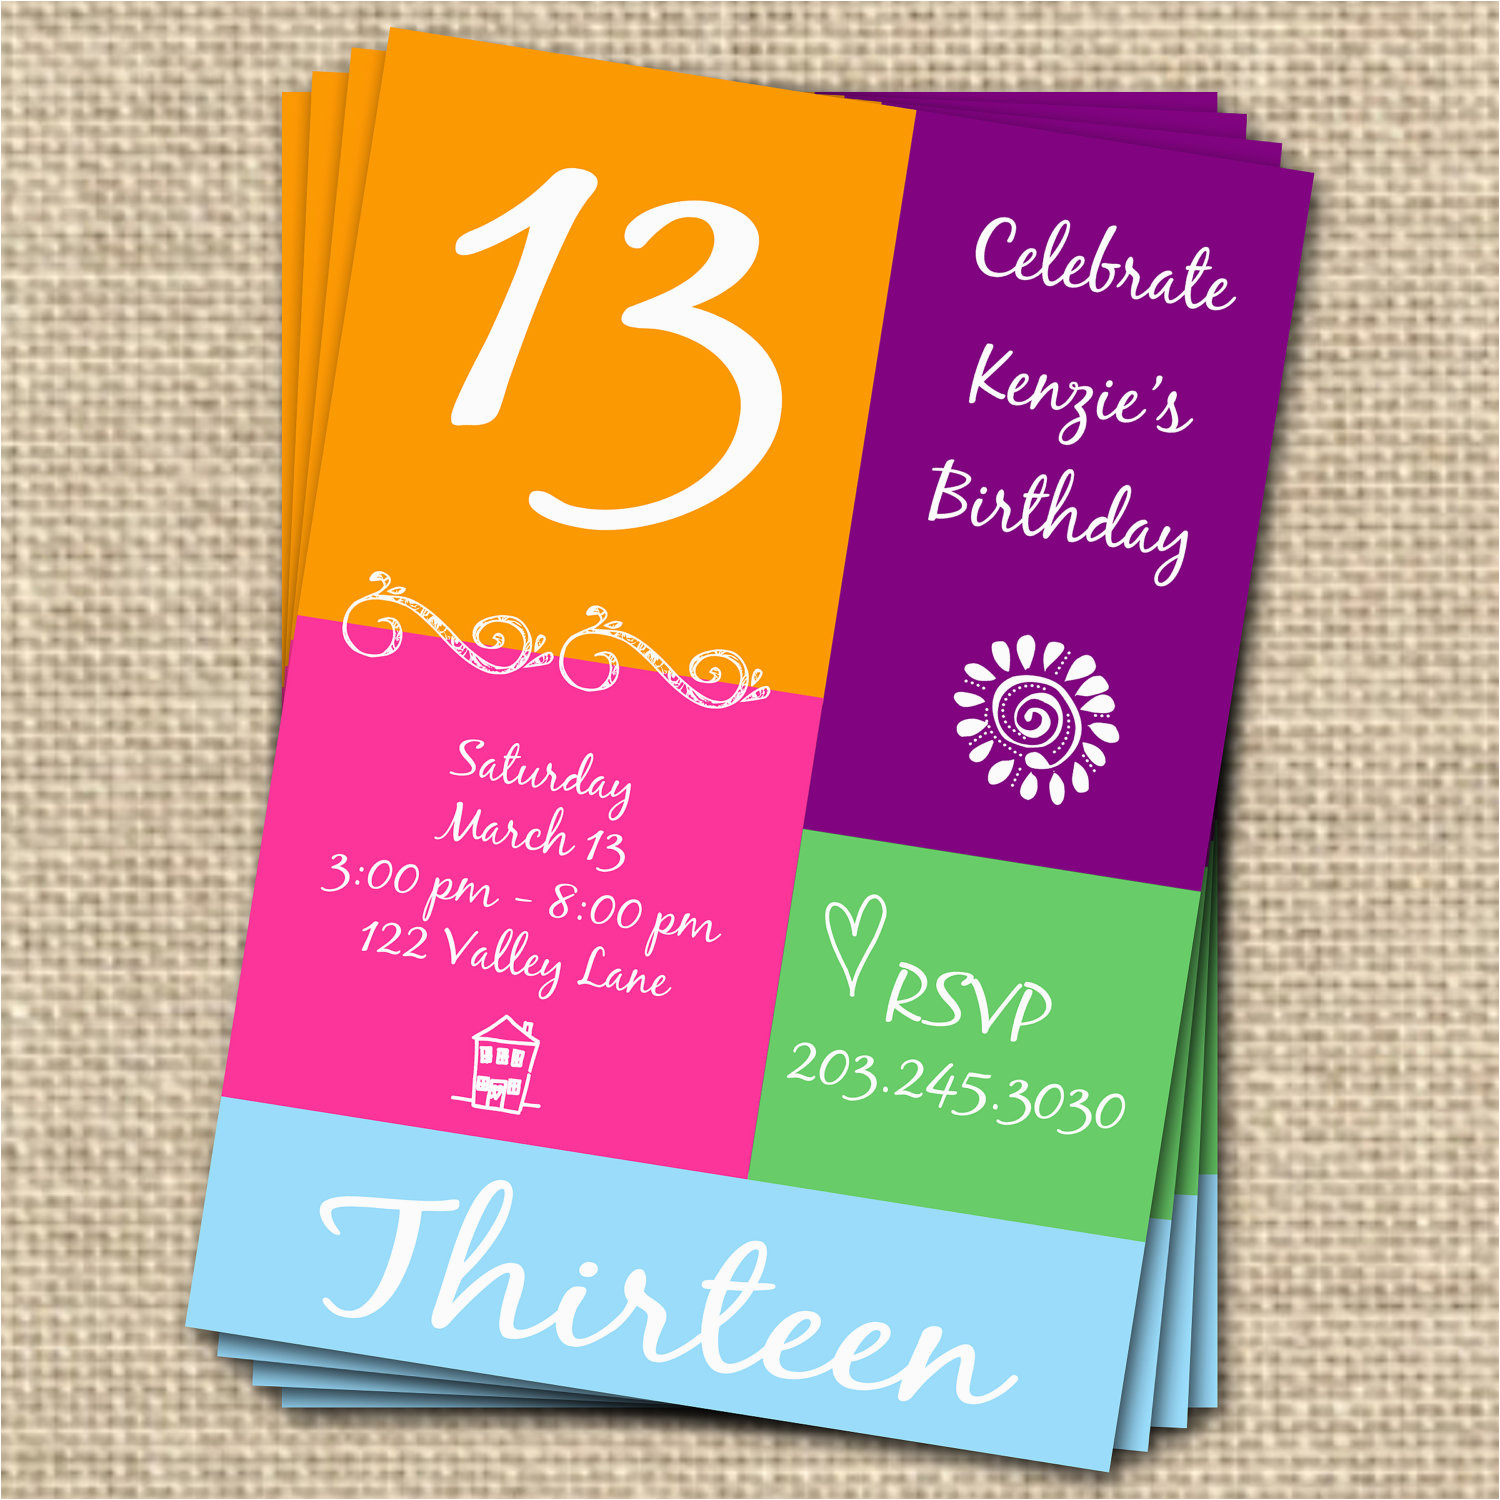 Birthday Invitations for 13 Year Old Boy 7 Best Images Of Free Printable 13th Birthday Invitations